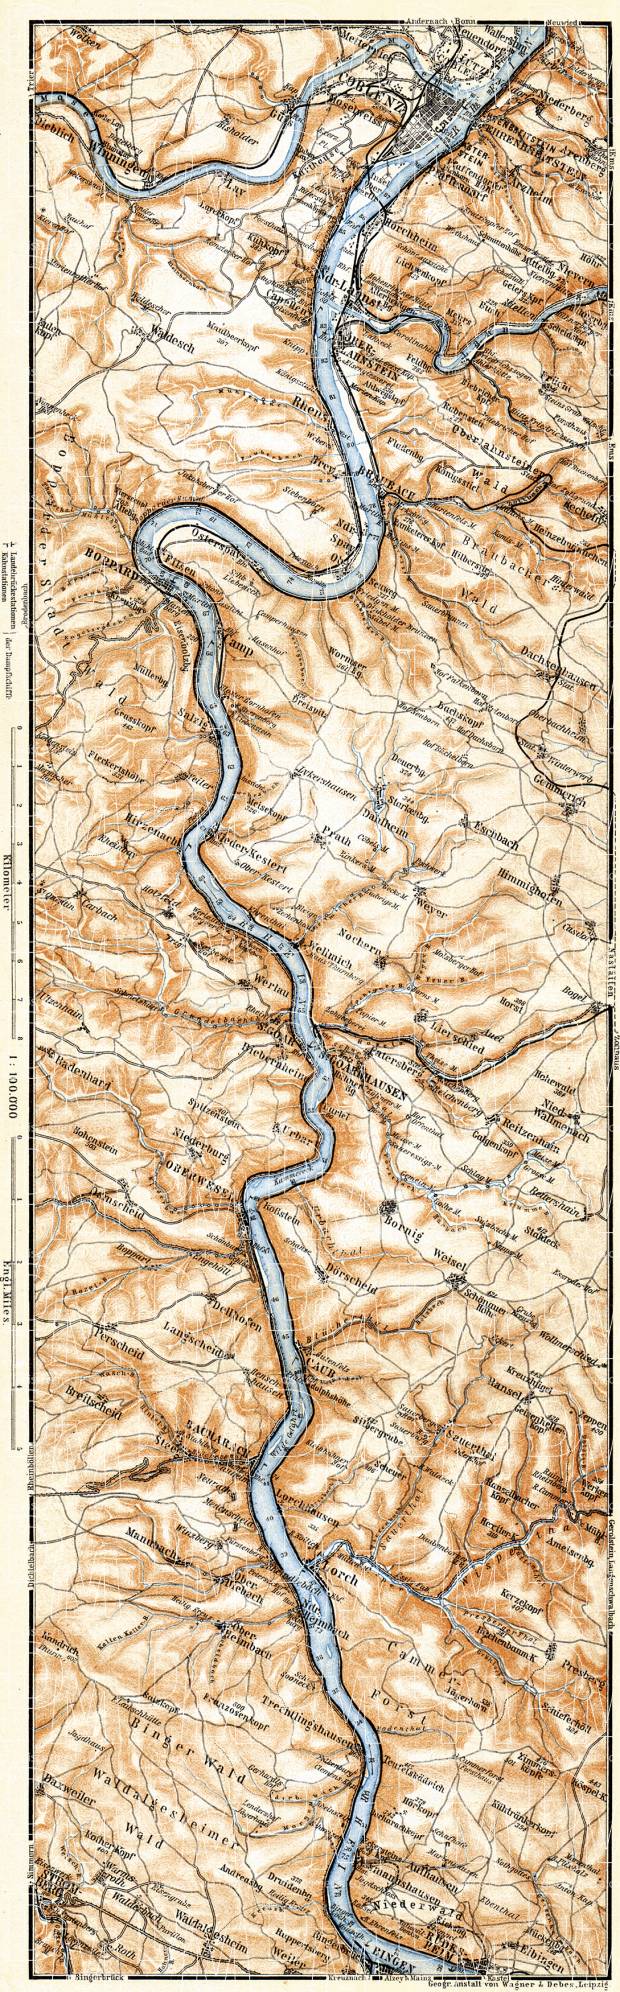 Map of the Course of the Rhine from Coblenz to Bingen, 1905. Use the zooming tool to explore in higher level of detail. Obtain as a quality print or high resolution image